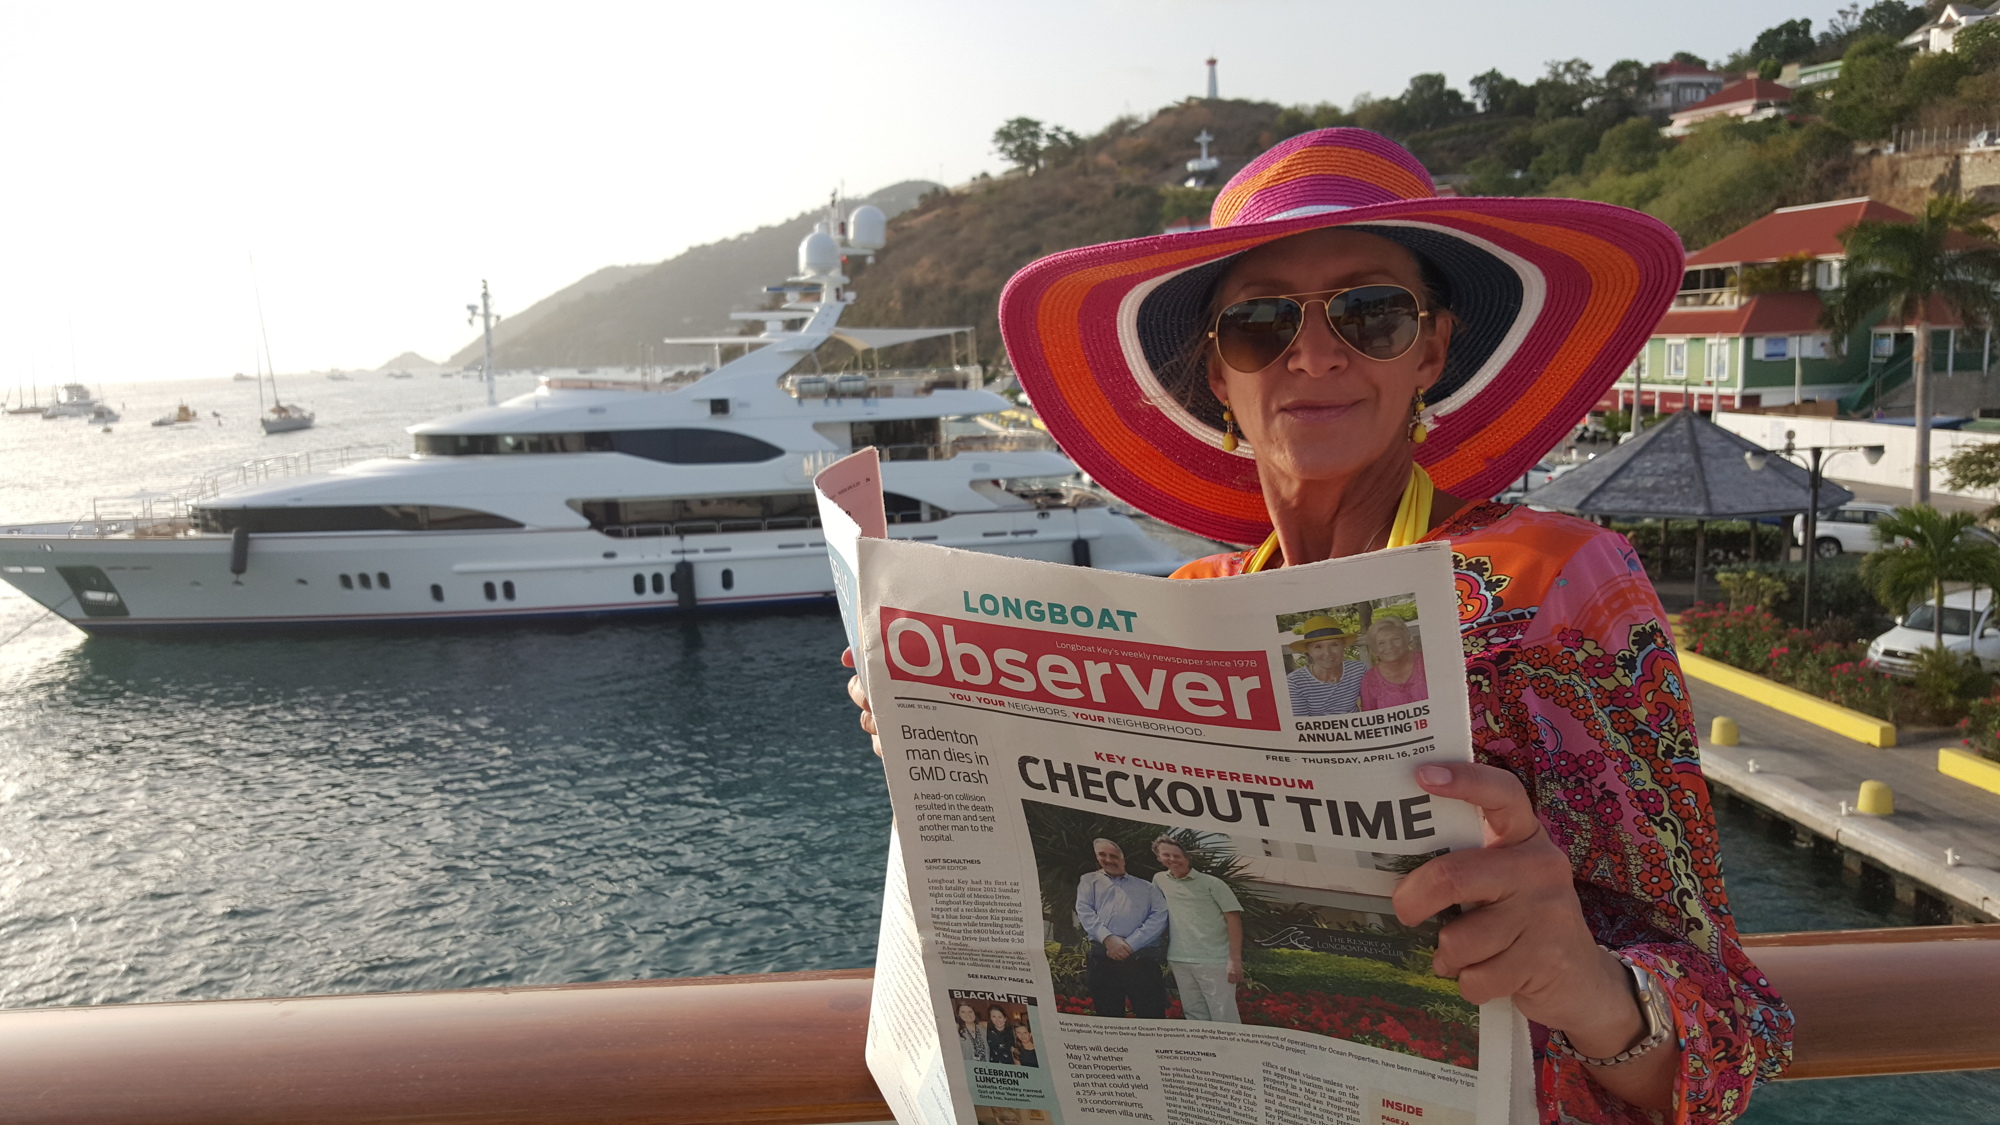 Barbie Nilsen found time to catch up on her Observer news while yachting in St. Barth in the French West Indies.